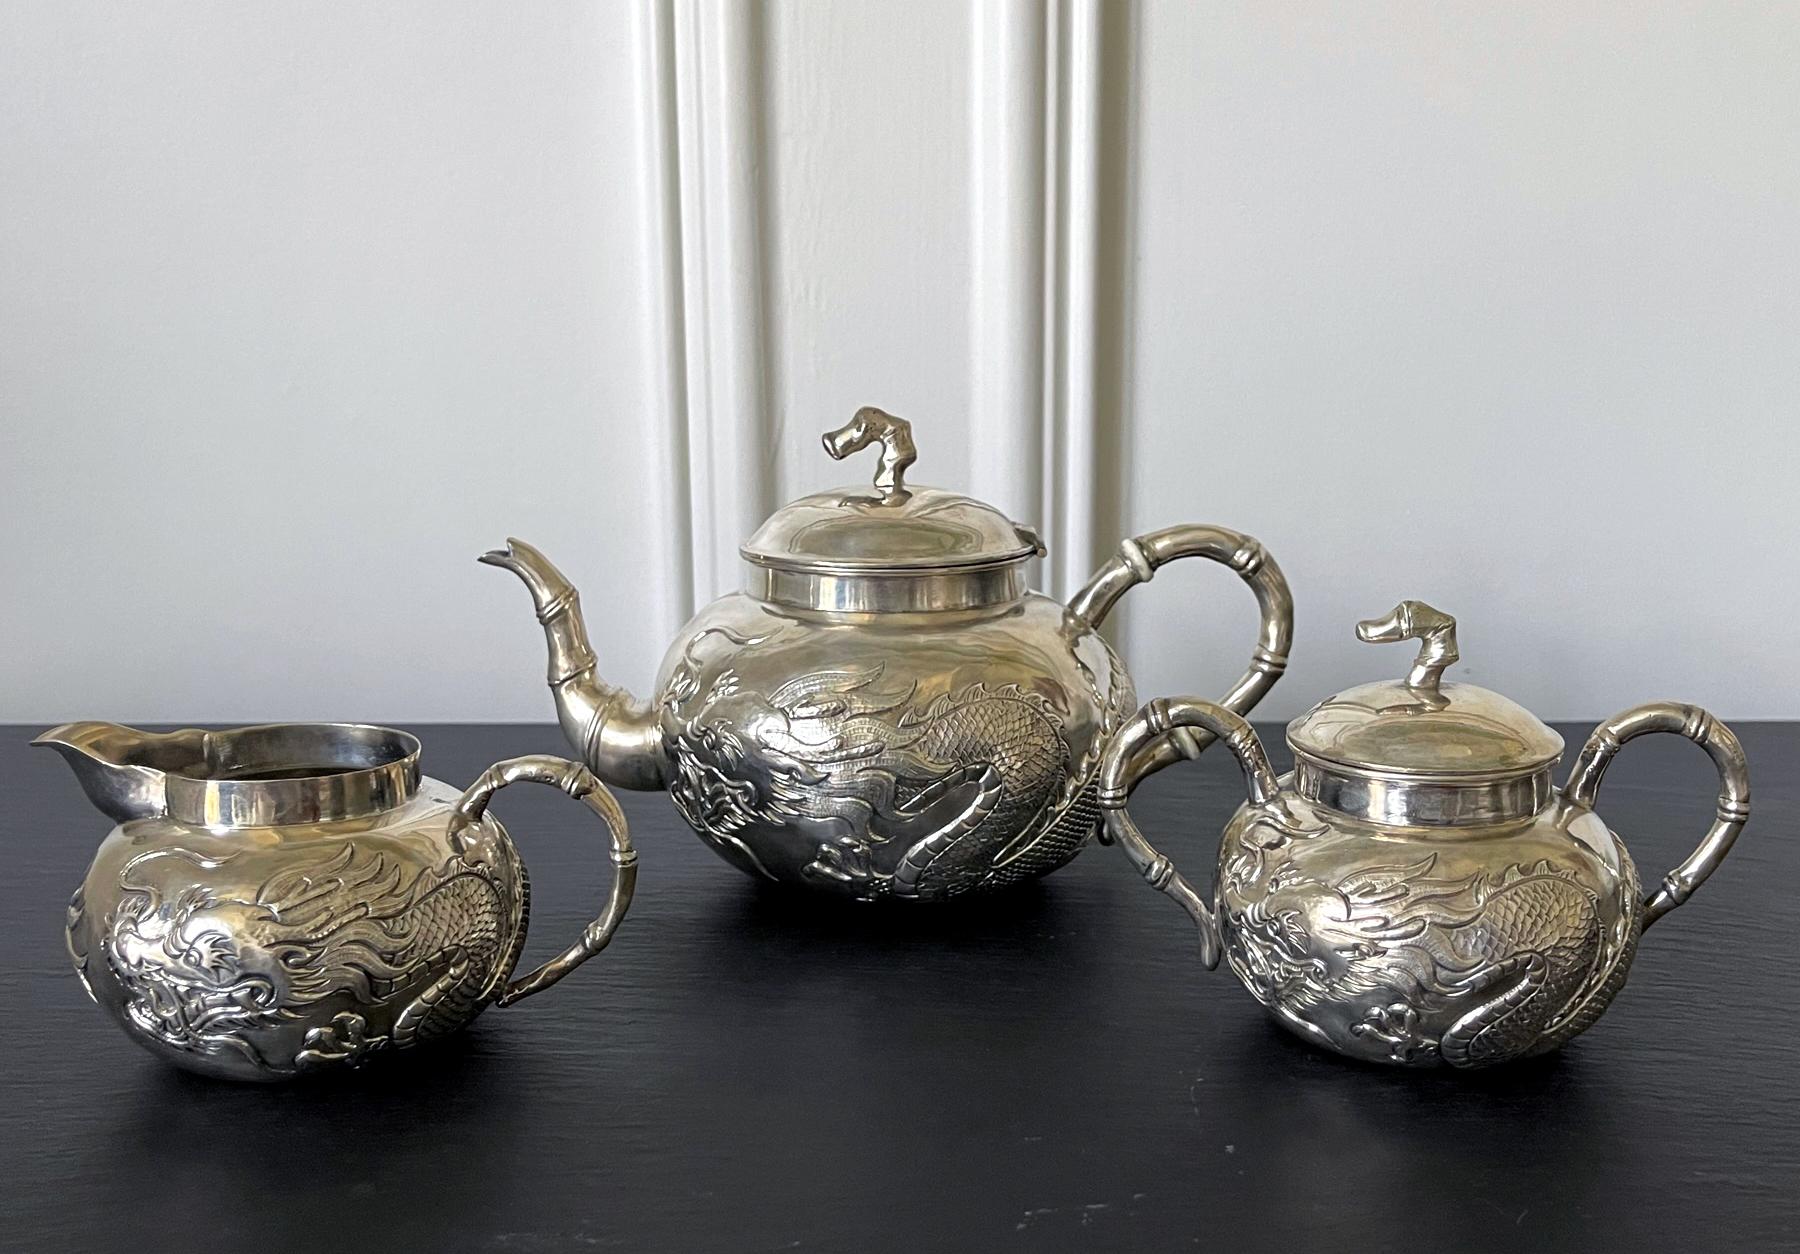 An early set of Chinese export sterling silver tea service circa 1840-70s. The service consists of a lidded tea pot, a creamer and a sugar bowl. The surface was beautifully decorated with chased high-relief dragons with tightly chased scales,